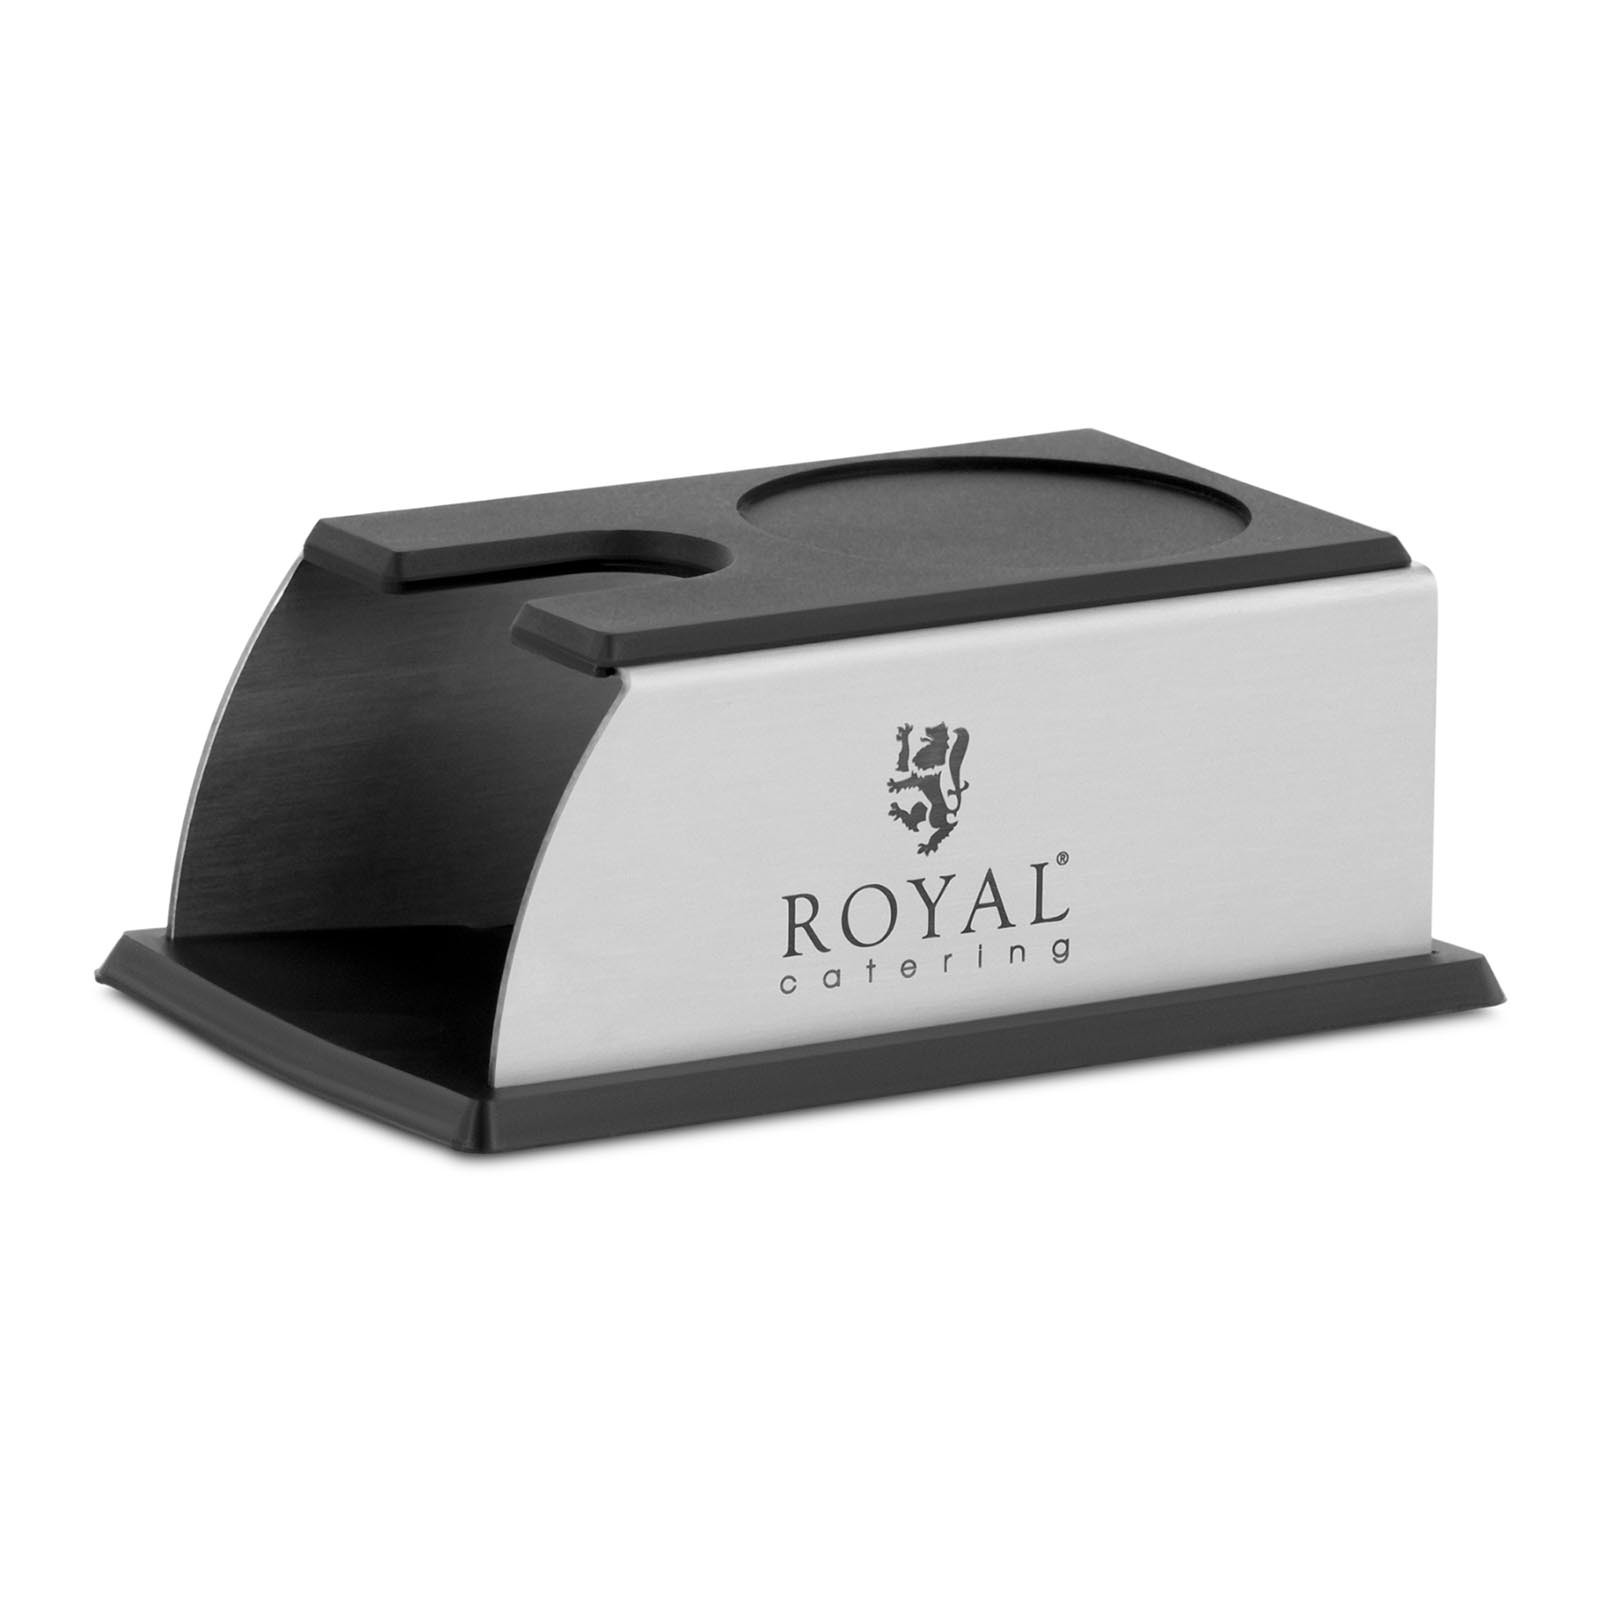 Royal Catering Aanstampstation - roestvrij staal / siliconen - 140x93x60 mm - Royal Catering